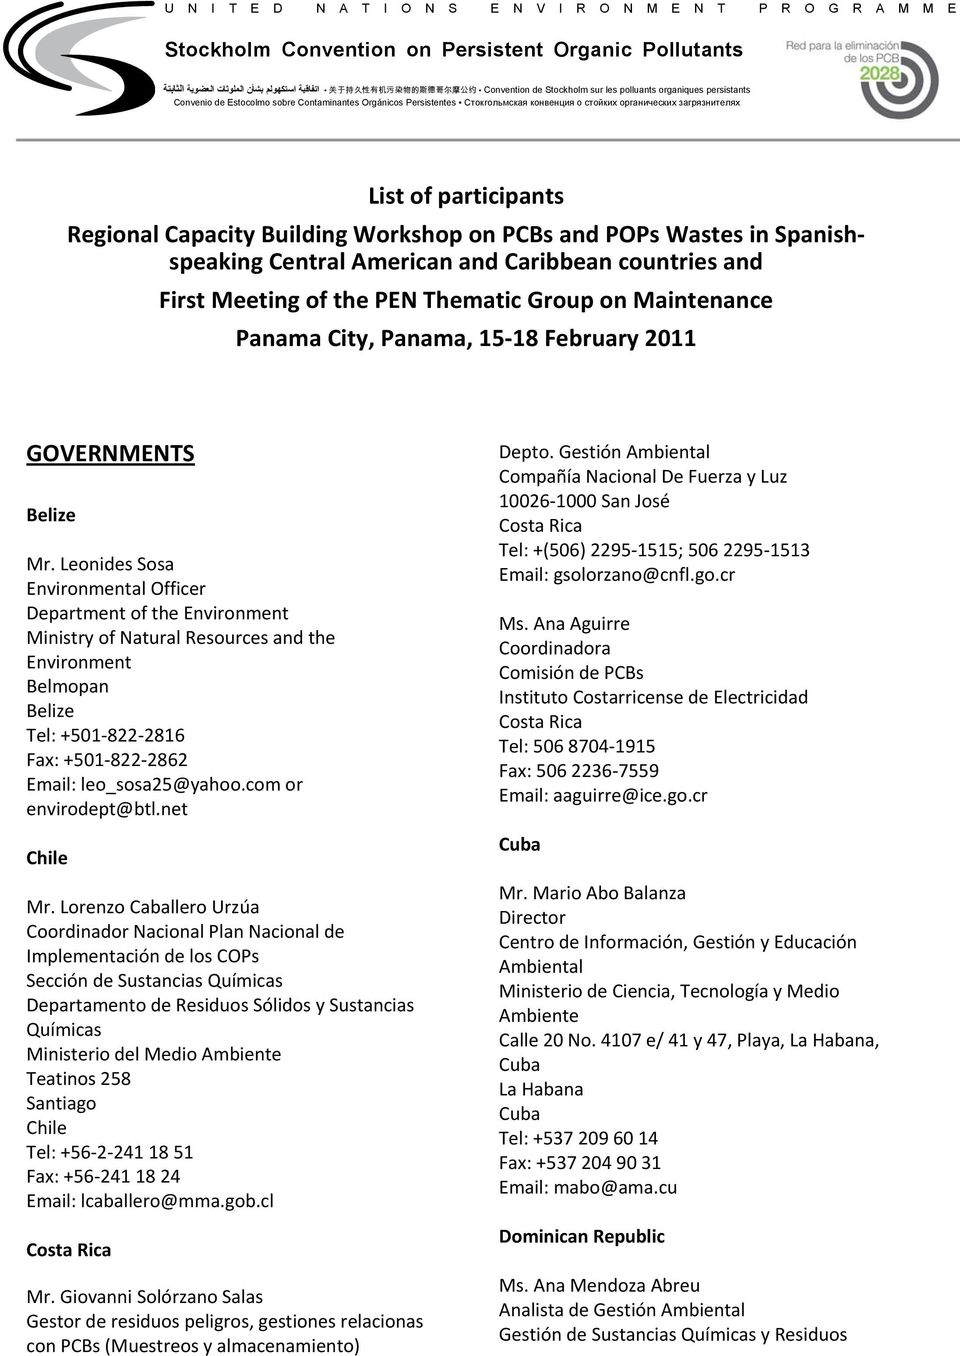 List of participants Regional Capacity Building Workshop on PCBs and POPs Wastes in Spanishspeaking Central American and Caribbean countries and First Meeting of the PEN Thematic Group on Maintenance